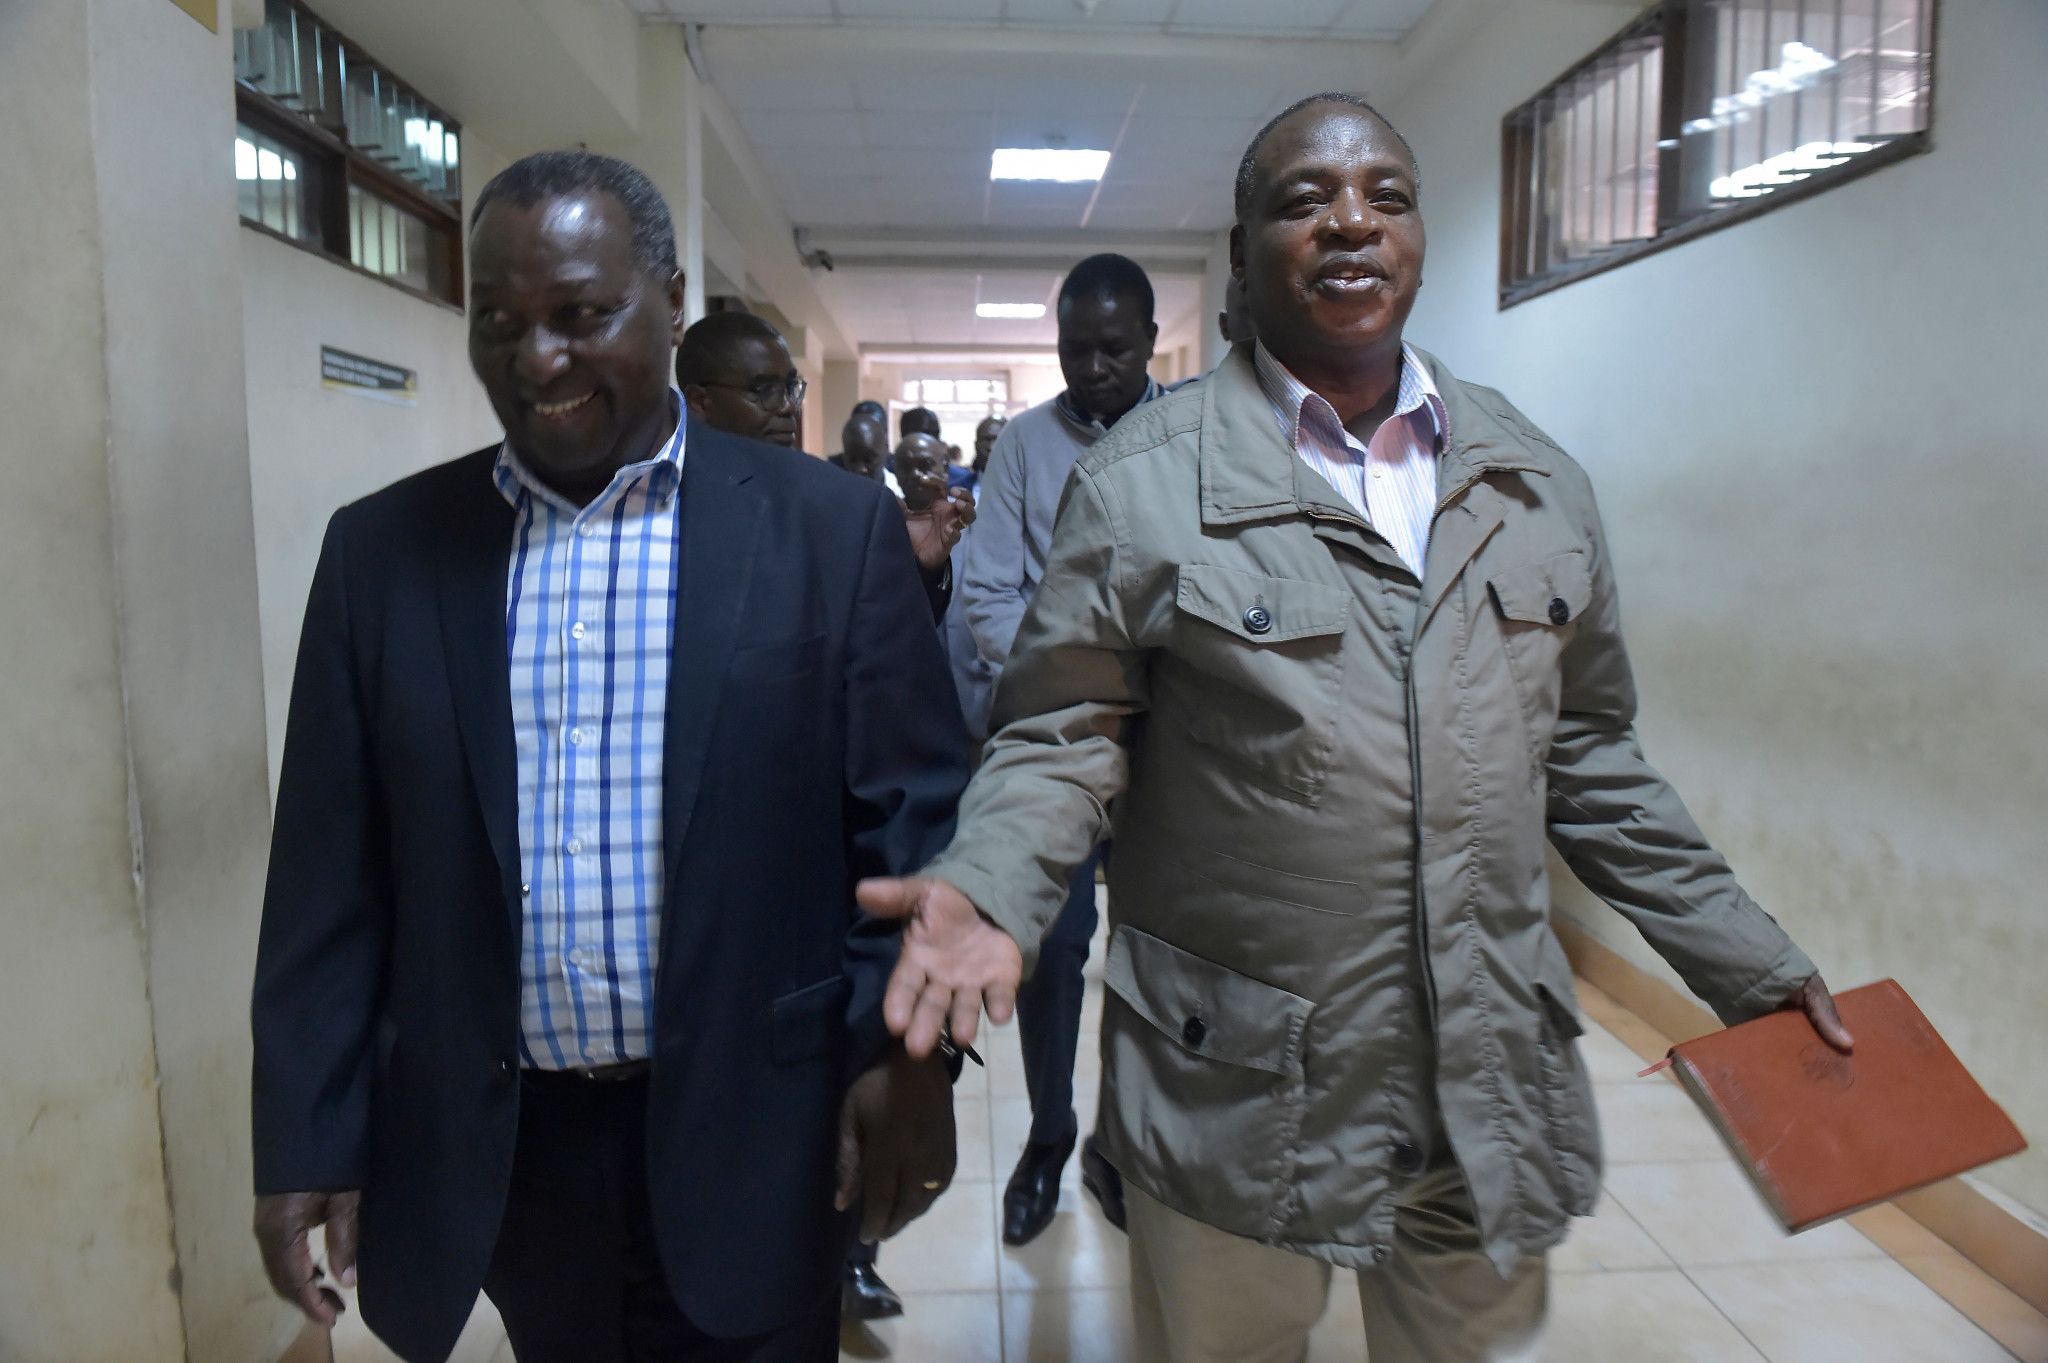 Kenyan Rio 2016 Chef de Mission freed after winning appeal against 17-year jail sentence